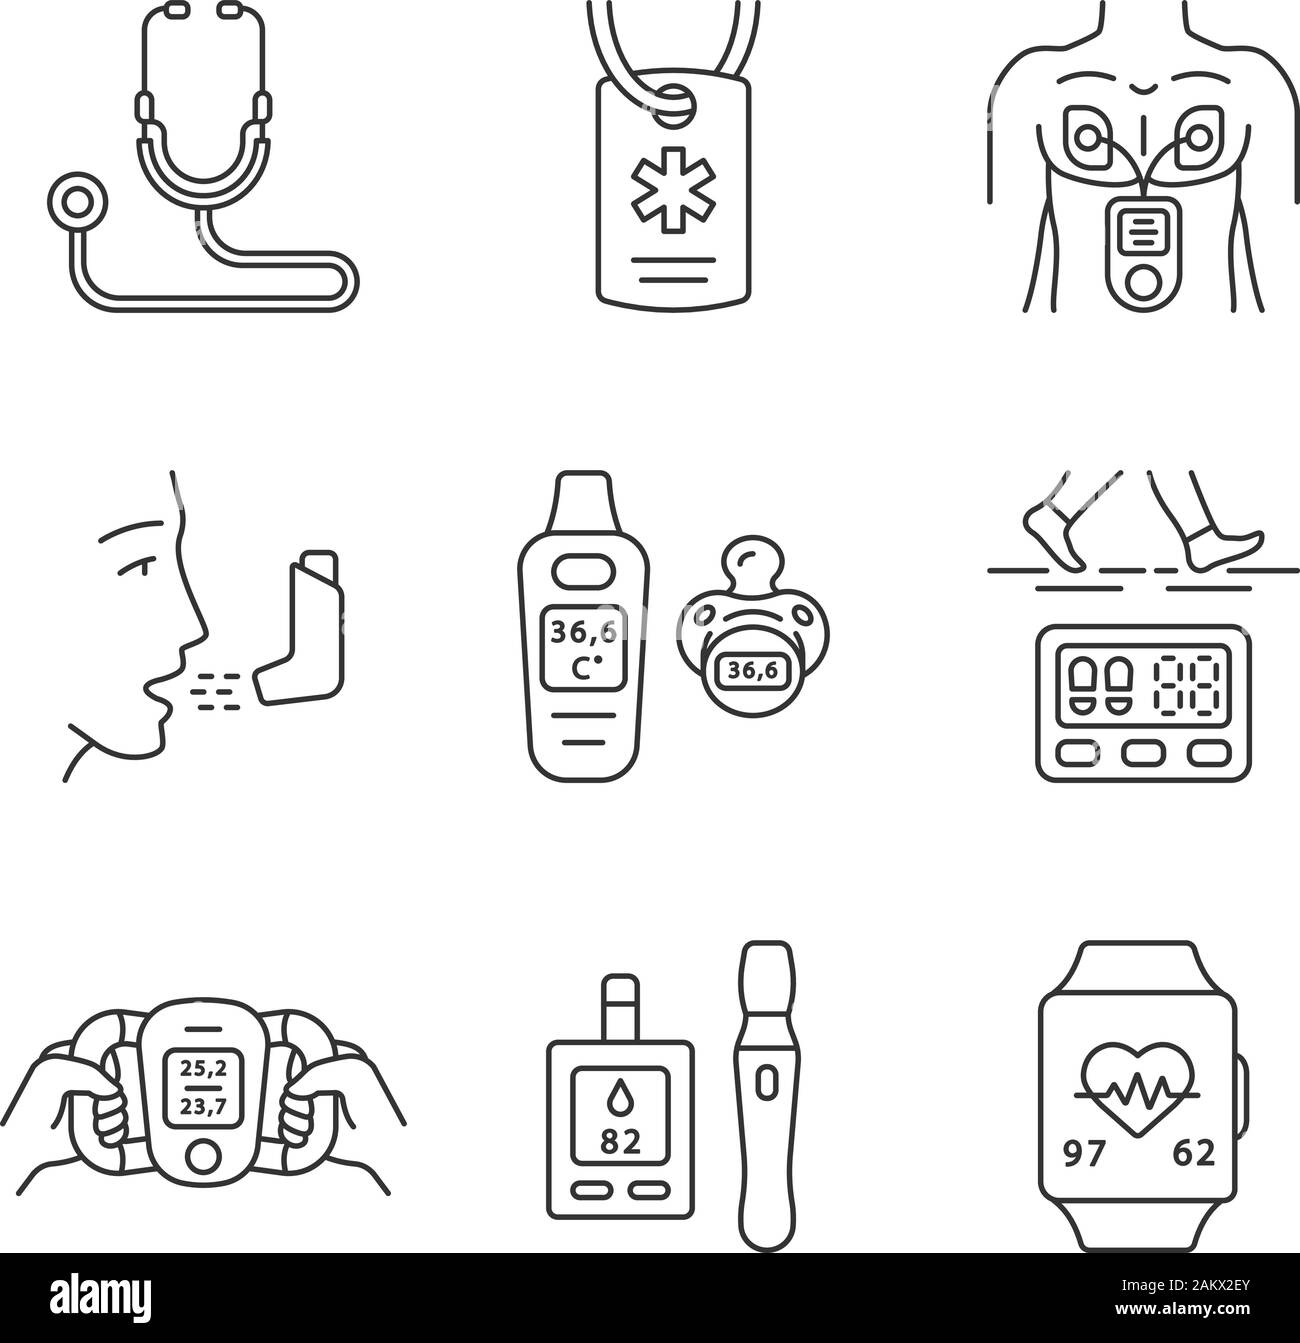 Medical devices linear icons set. Stethoscope, inhaler, muscle stimulator, glucometer, pedometer, fitness tracker. Thin line contour symbols. Isolated Stock Vector